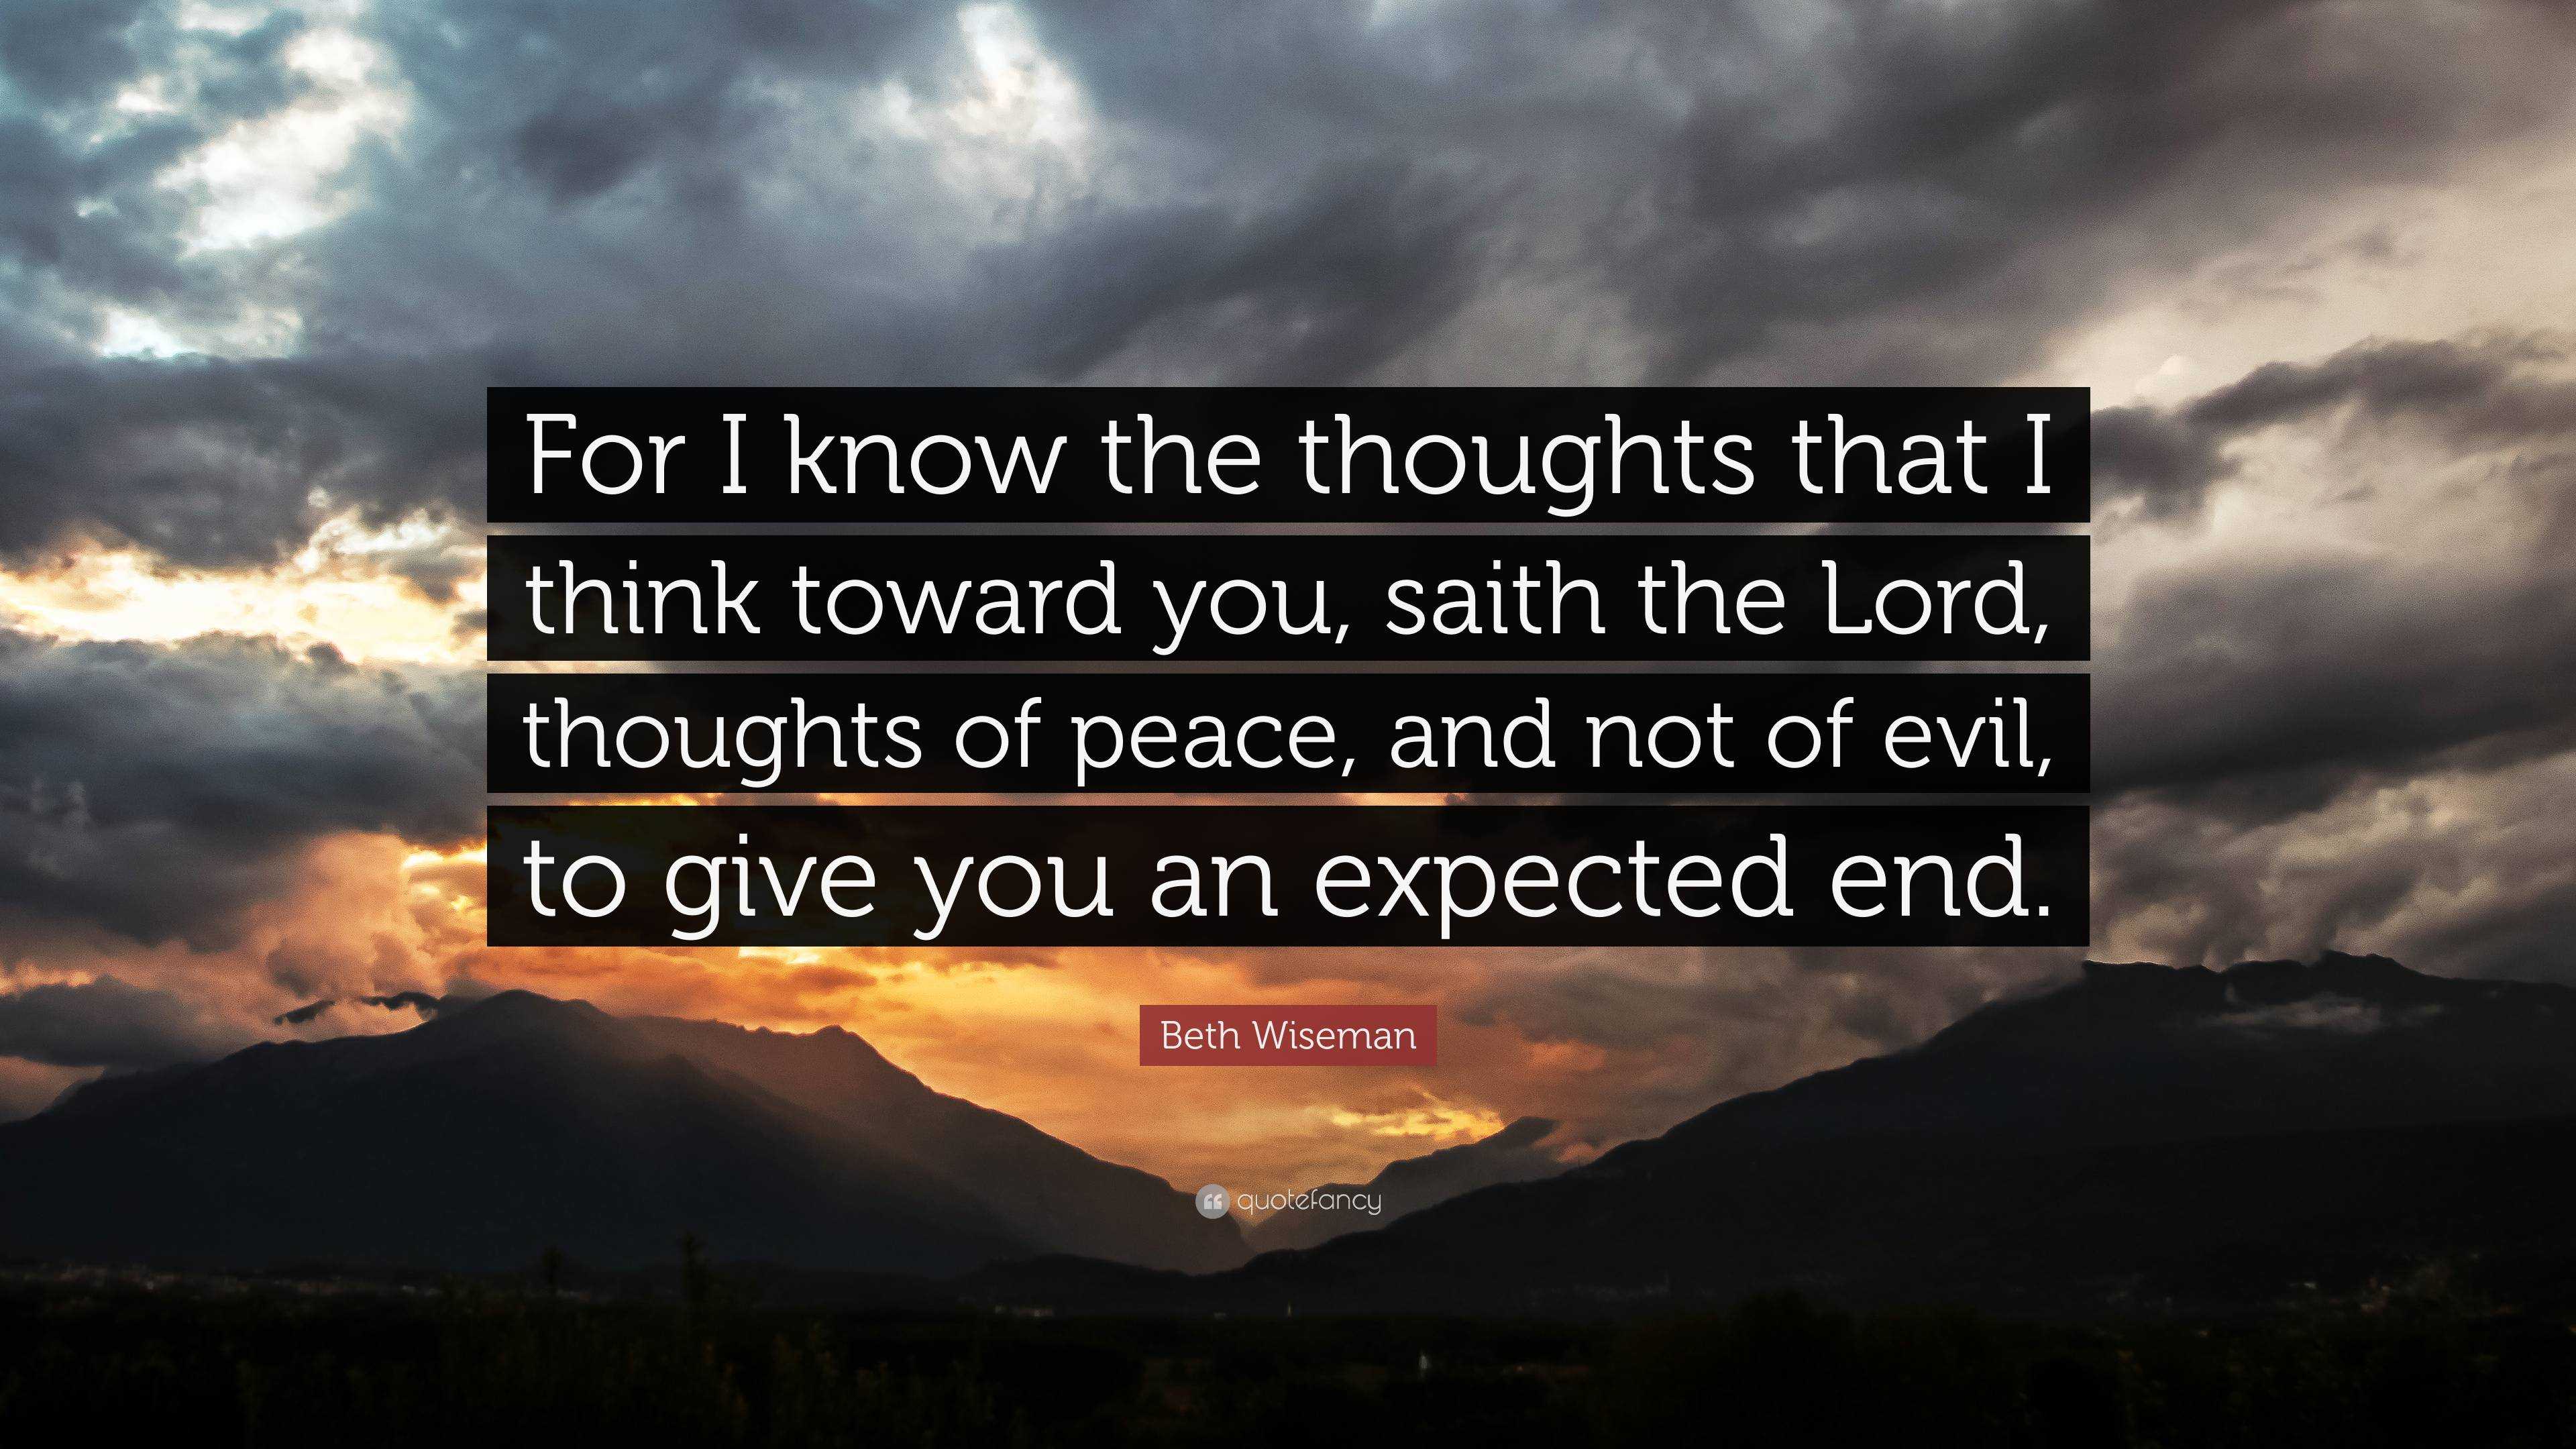 Beth Wiseman Quote: “For I know the thoughts that I think toward you ...